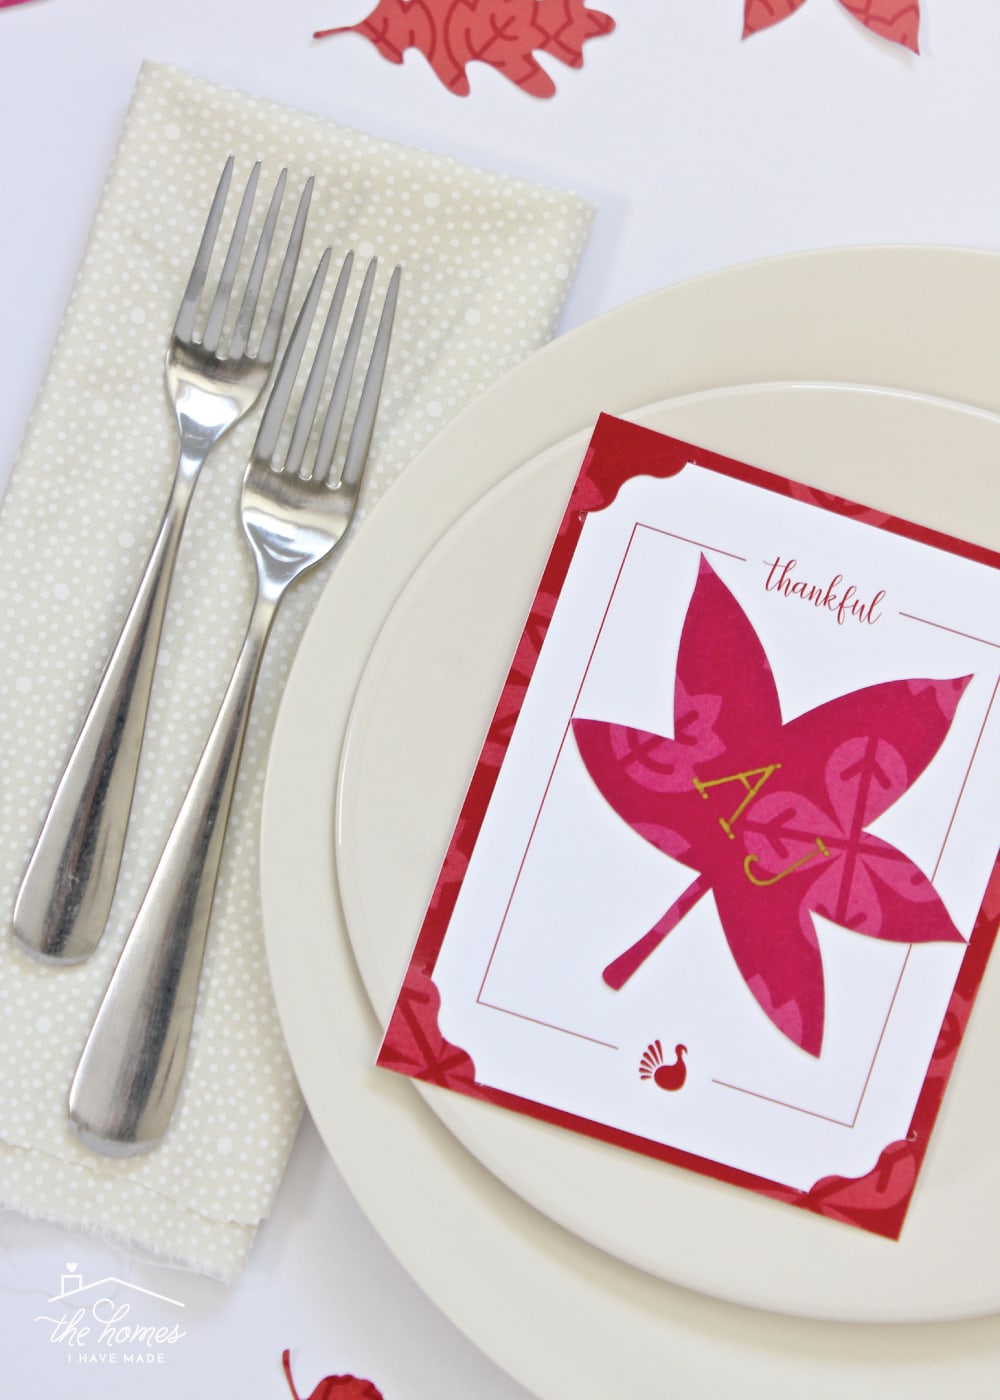 Cream dishes shown with red Thankful Card and red leaf Thanksgiving Place Card.